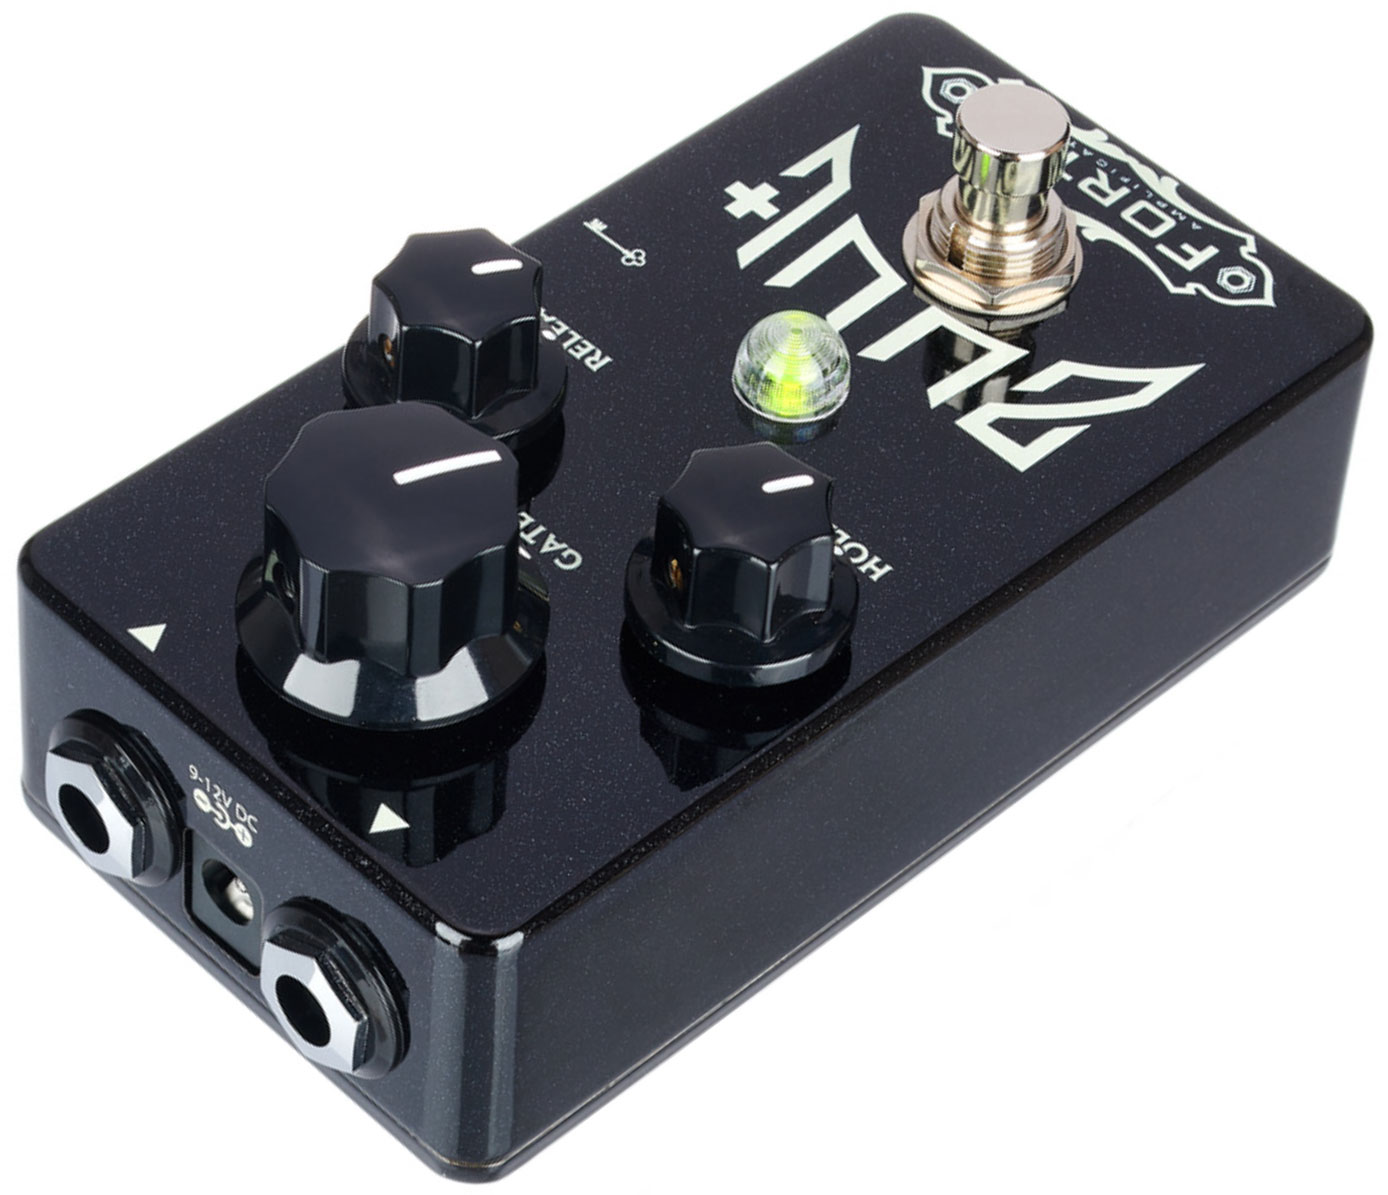 Fortin Amps Zuul+ Noise Gate - Pedal compresor / sustain / noise gate - Variation 2